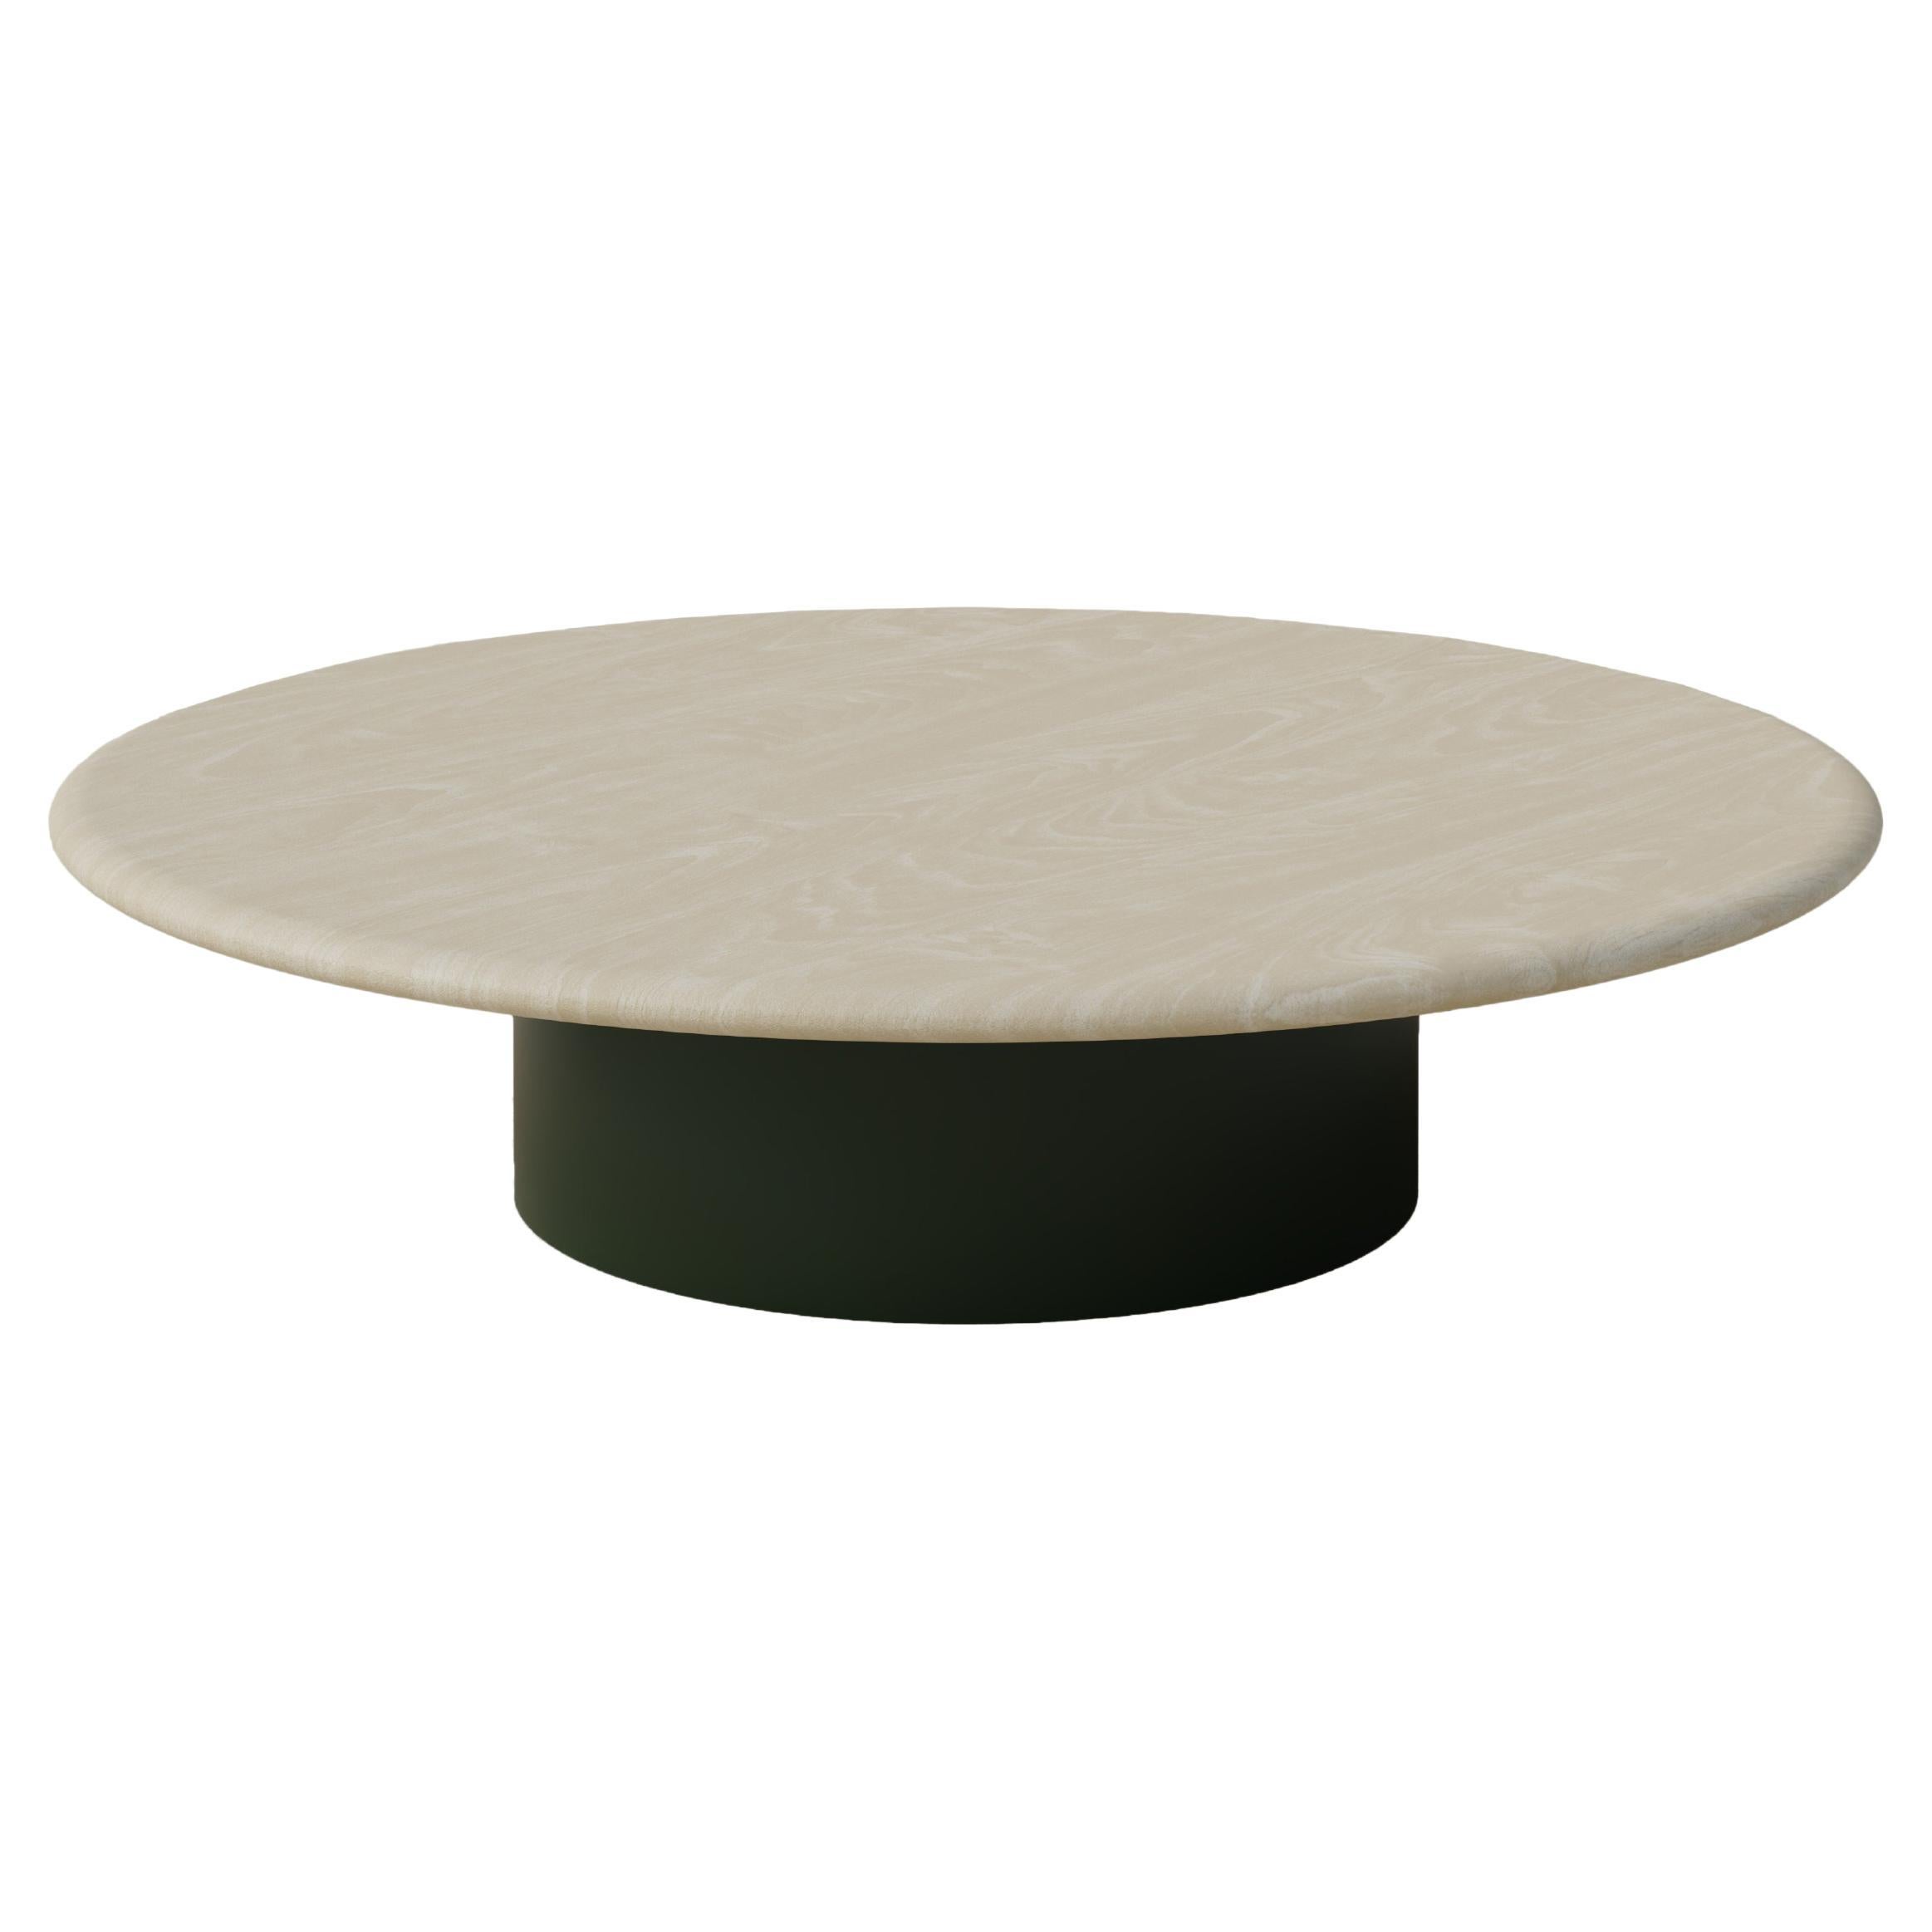 Raindrop Coffee Table, 1000, Ash / Moss Green For Sale